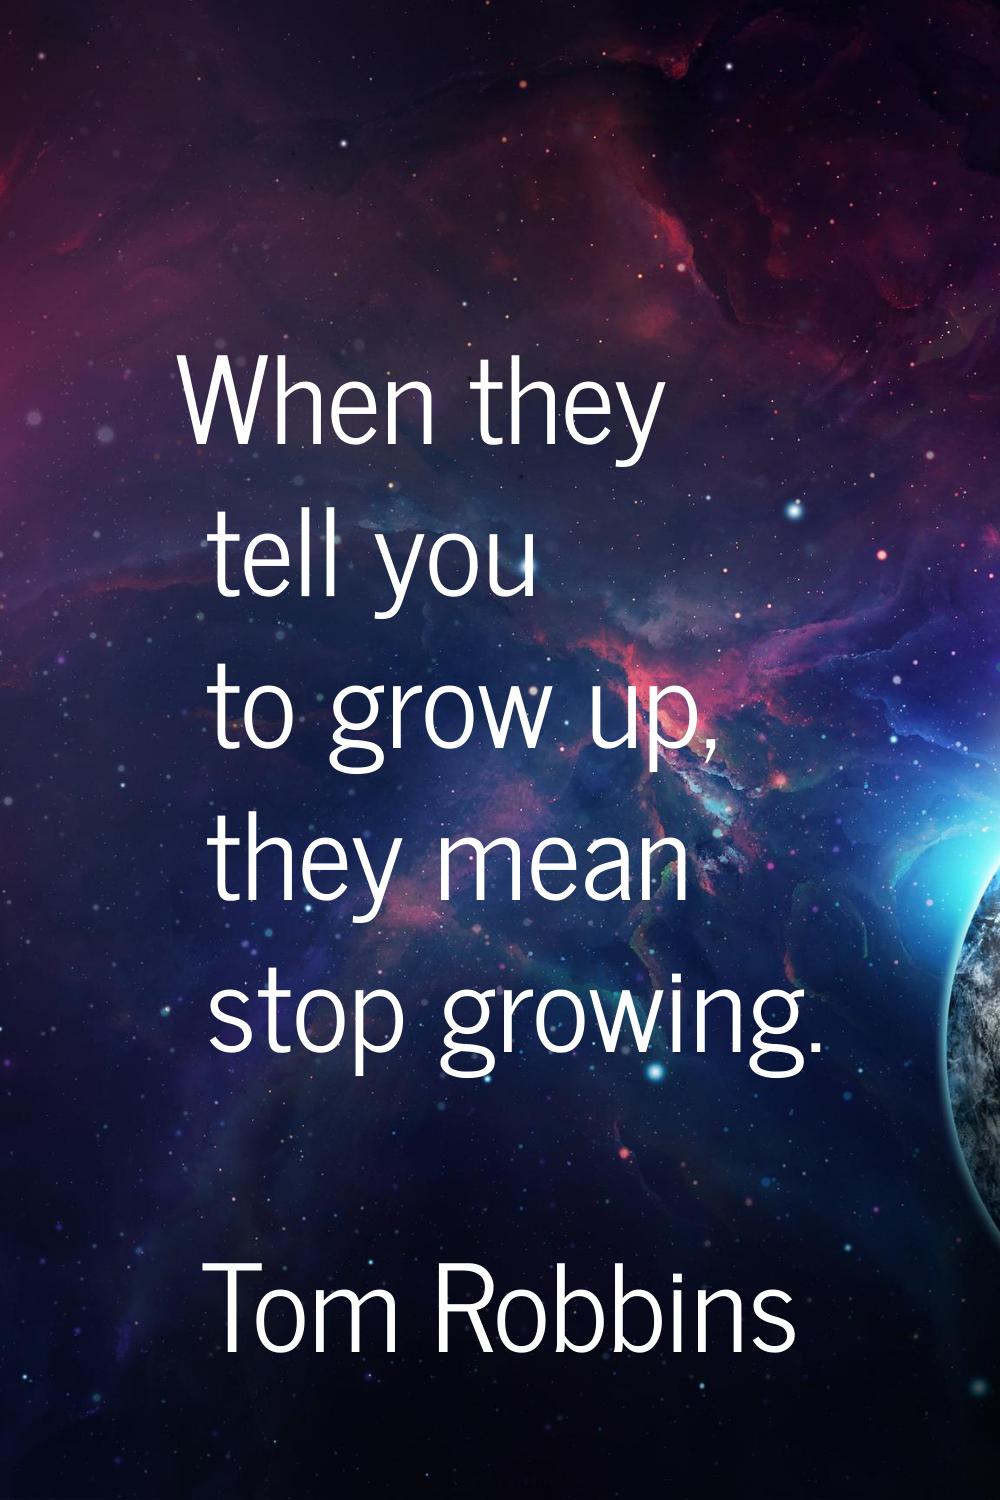 When they tell you to grow up, they mean stop growing.